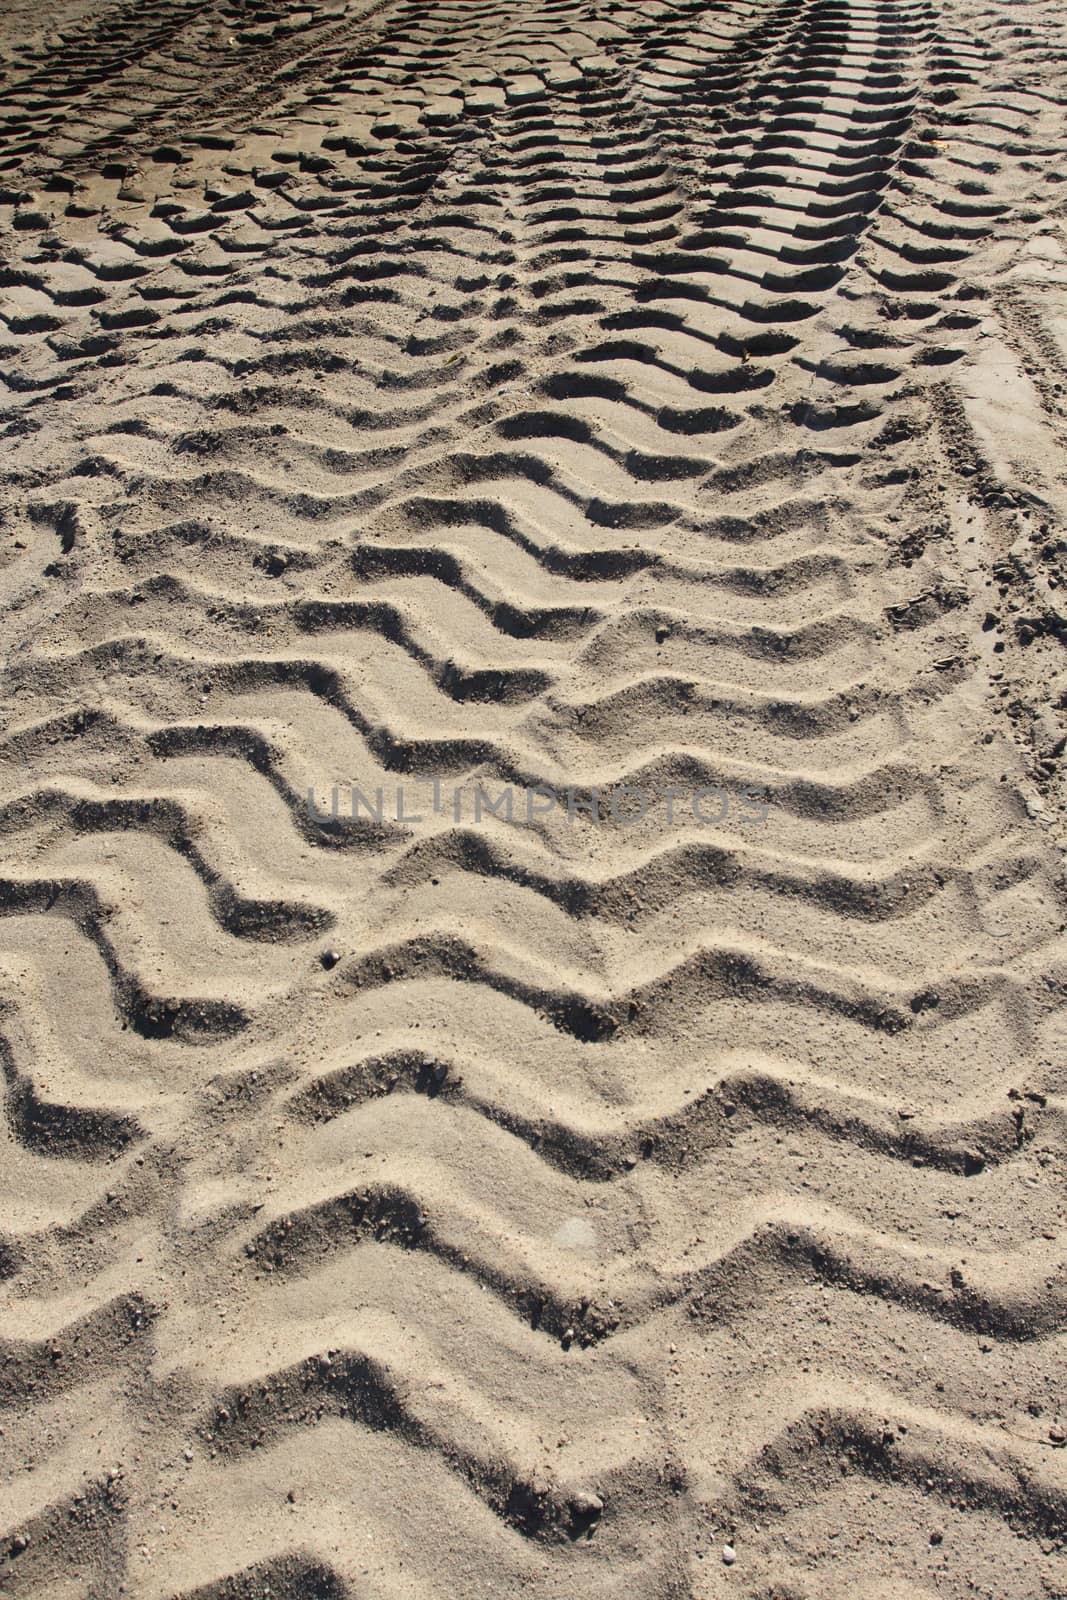 Big heavy tractor wheel tracks in the sand.